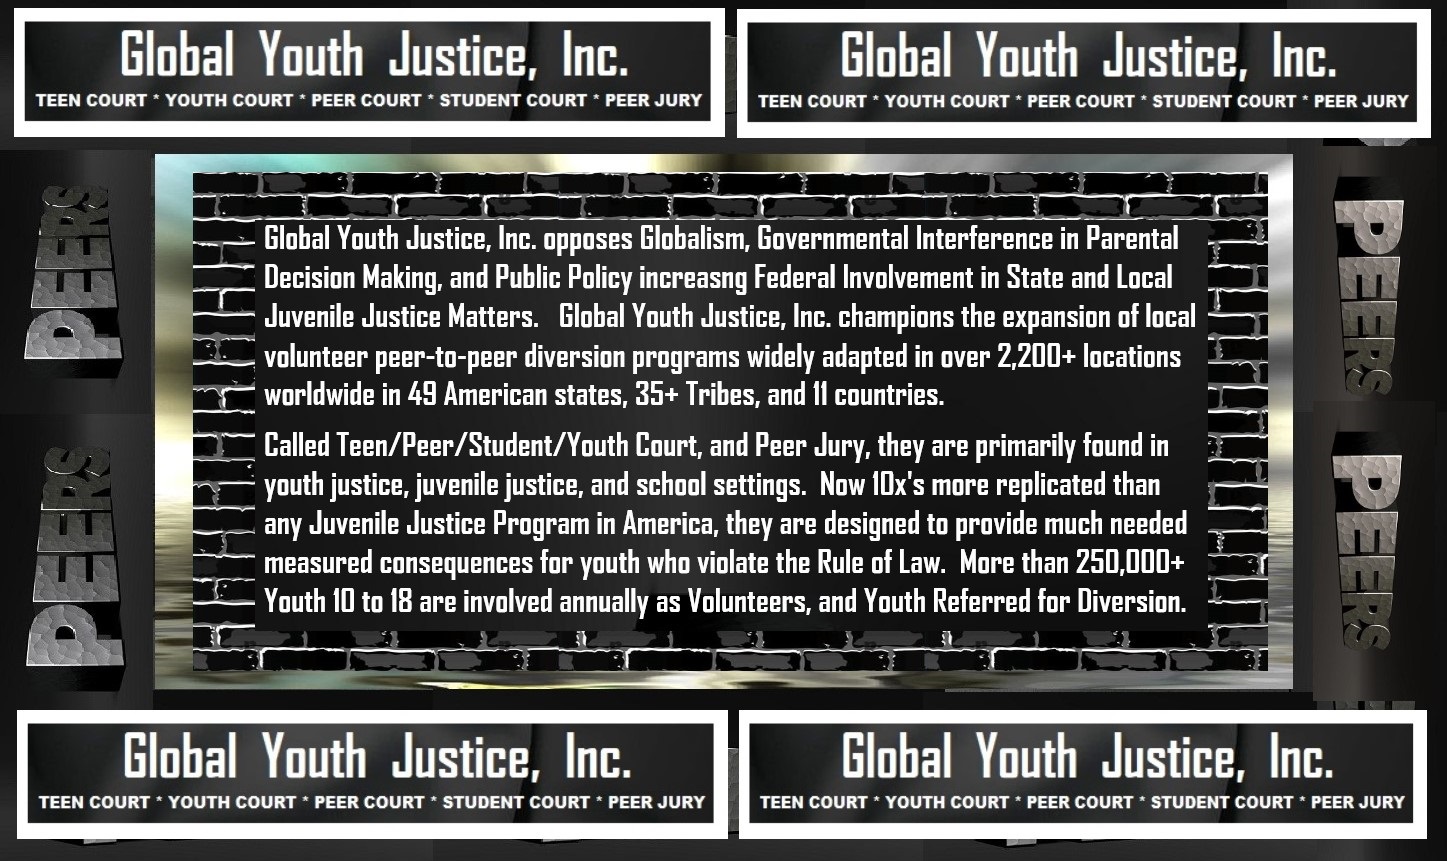 Global Youth Justice, Inc. Website on Teen Court, Youth Court, Peer Court, Student Court and Peer Jury Diversion Programs.